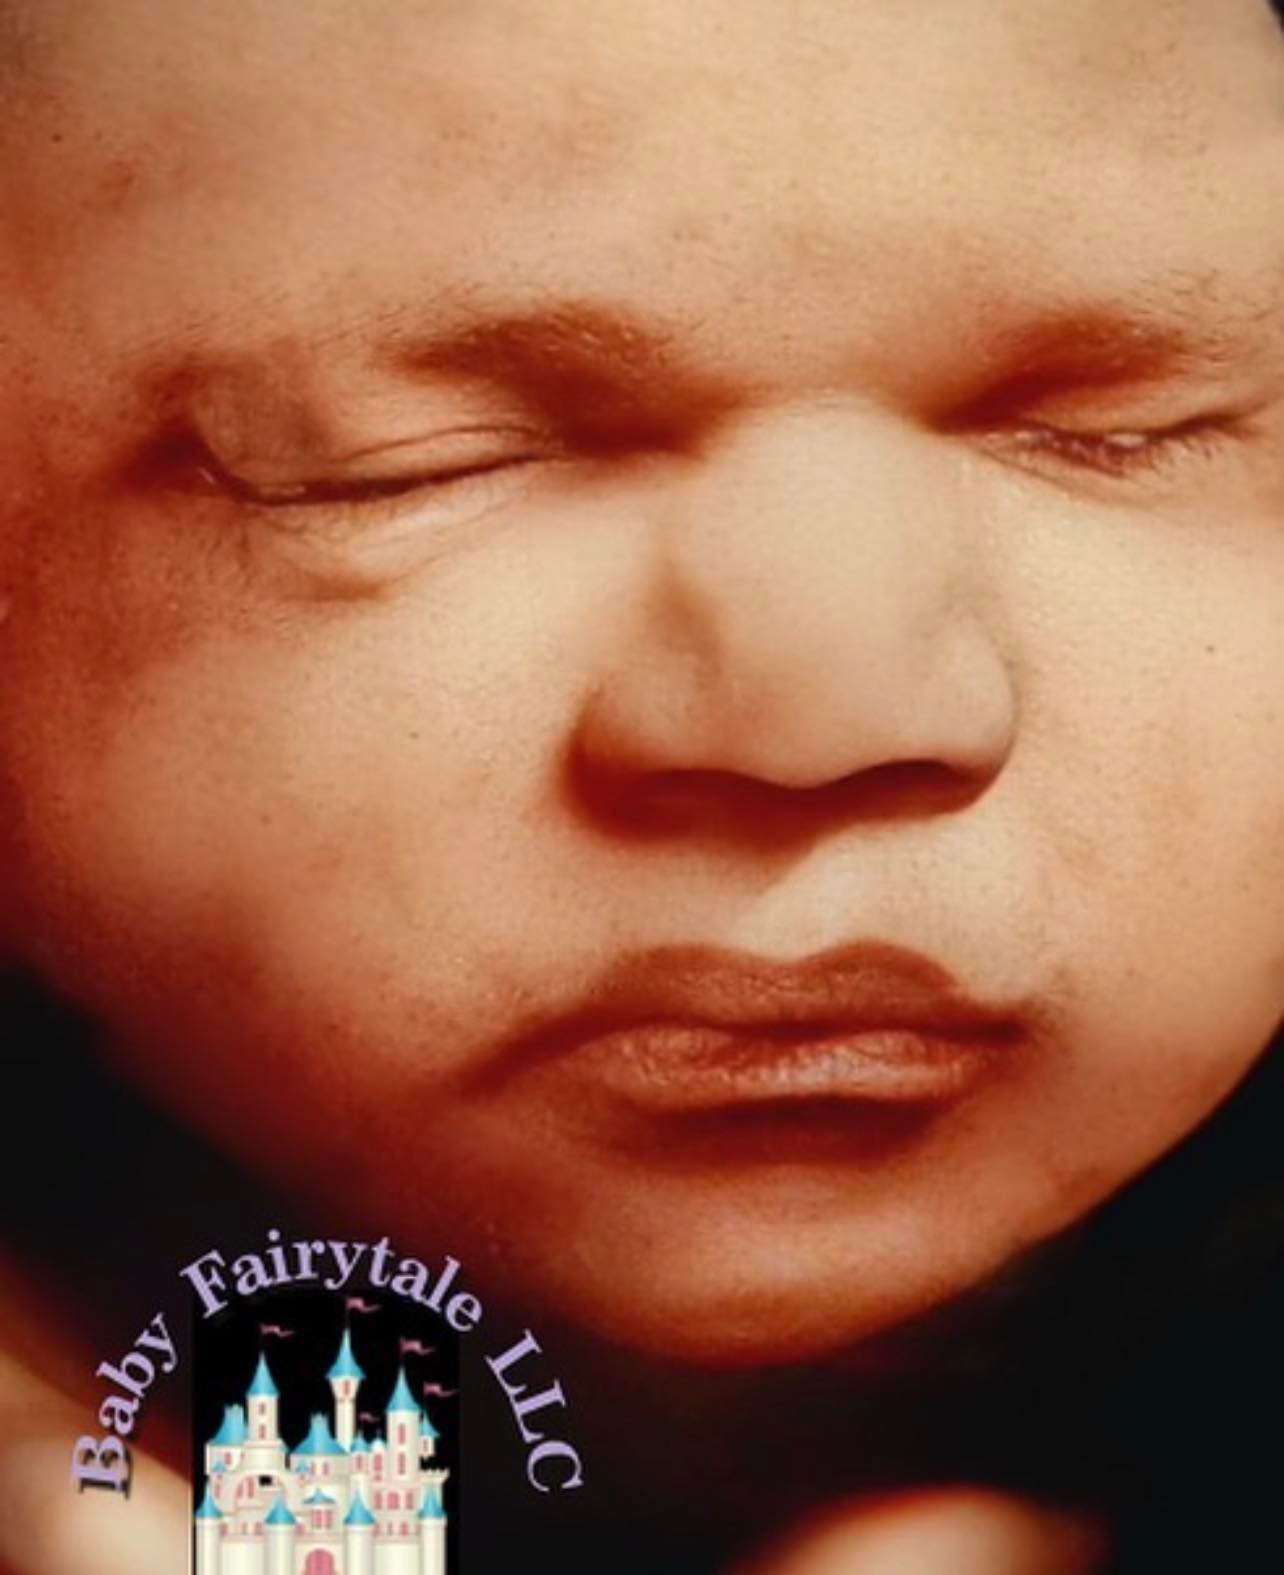 3D/4D and HDLive ultrasounds at Baby Fairytale